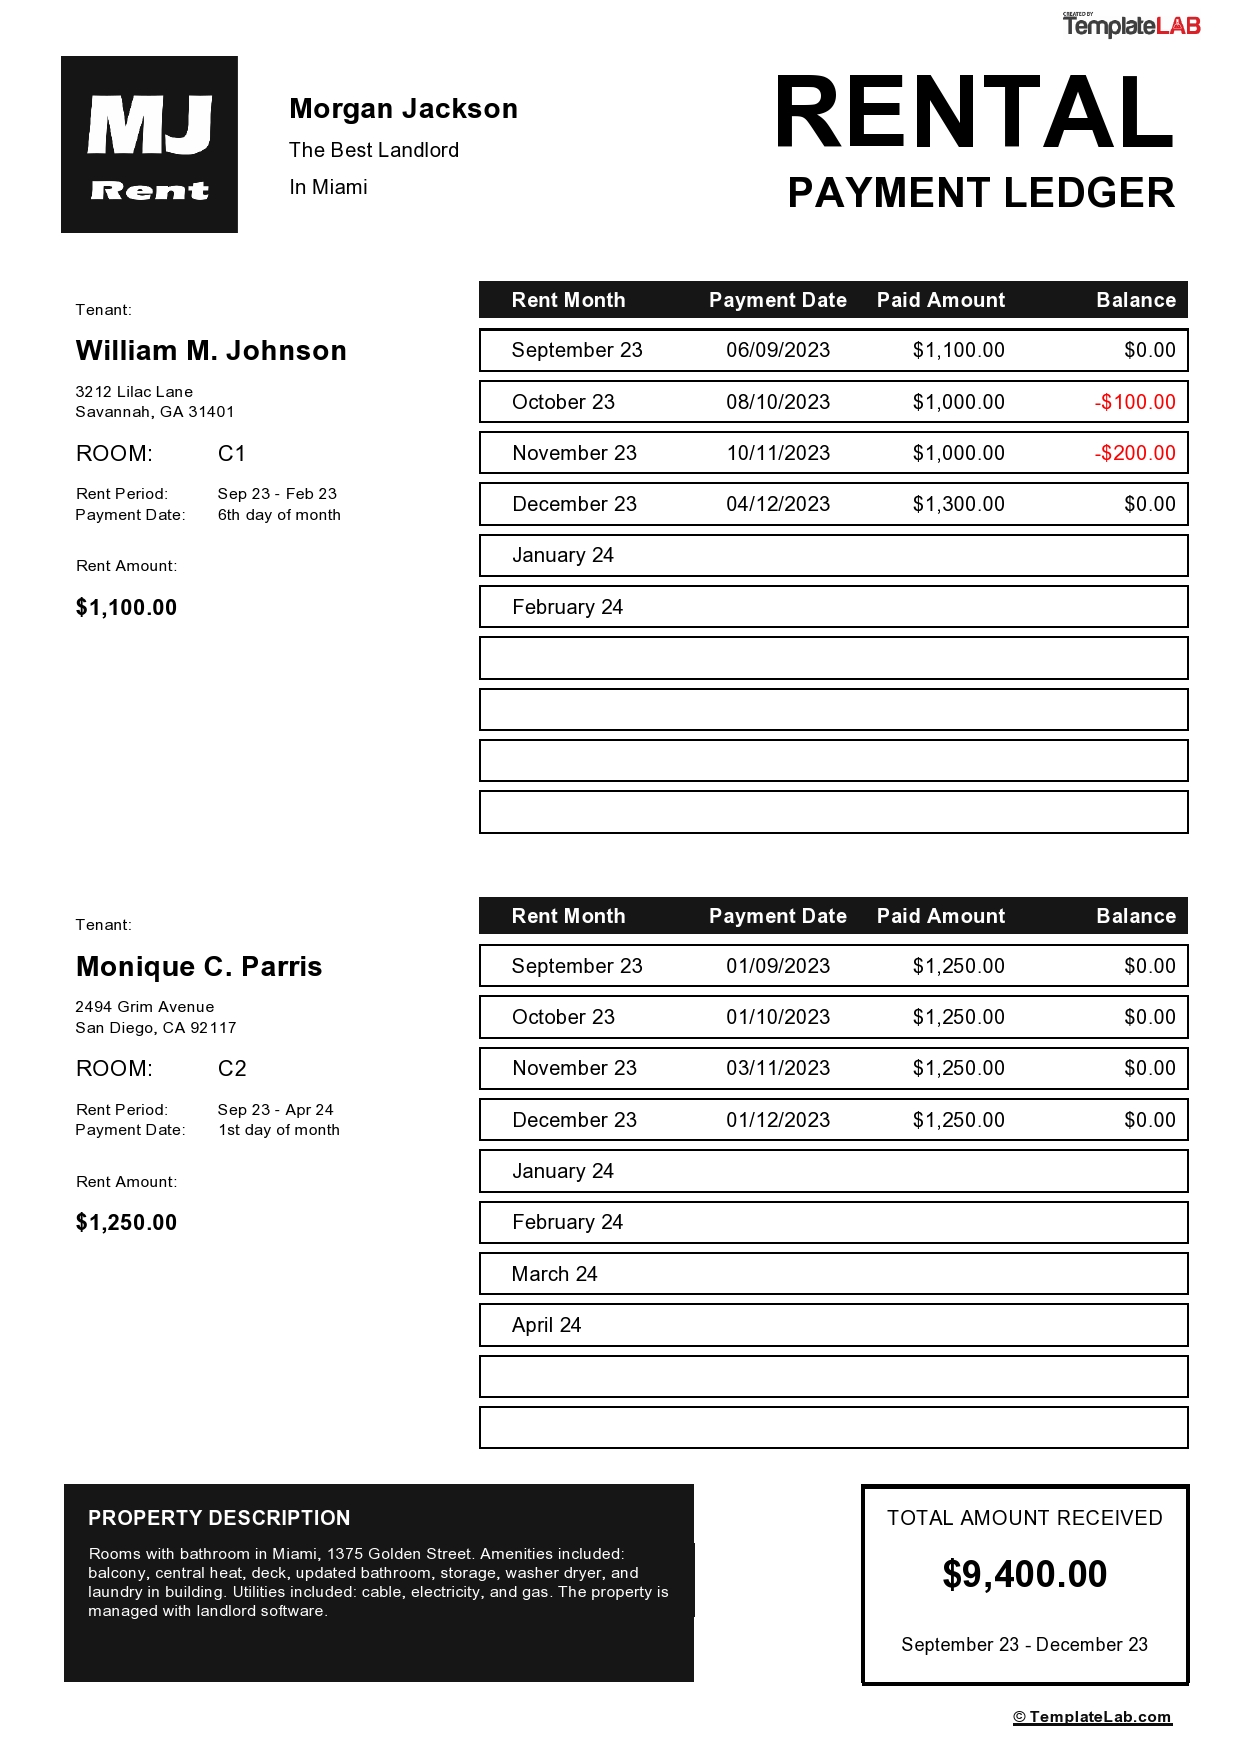 Free Landlord Rental Payment Ledger Template